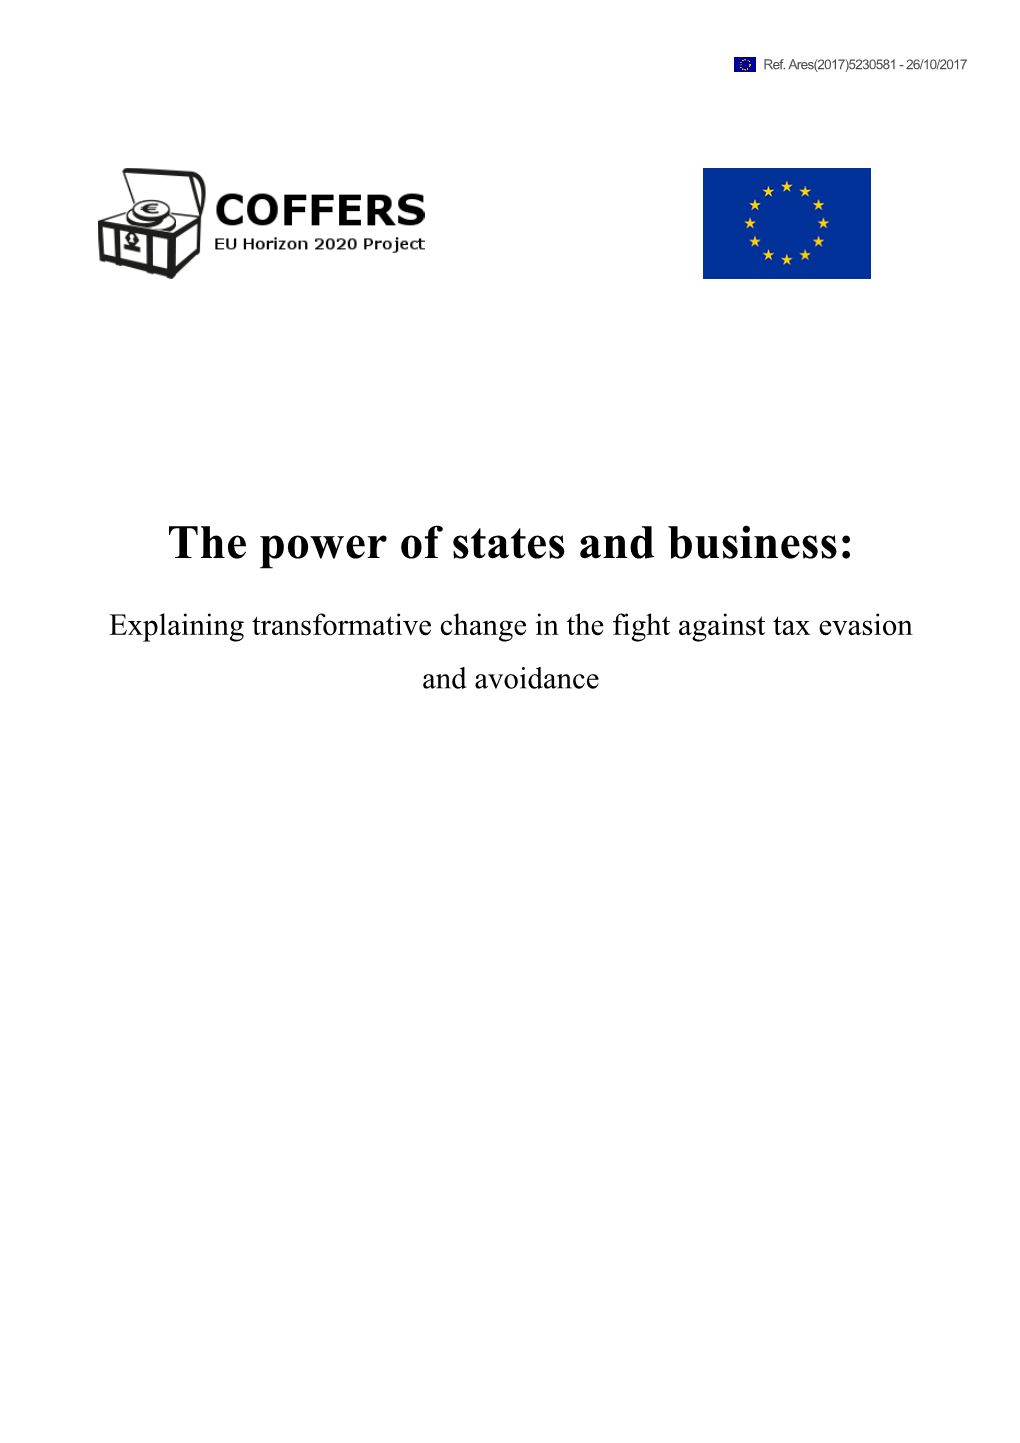 The Power of States and Business: Explaining